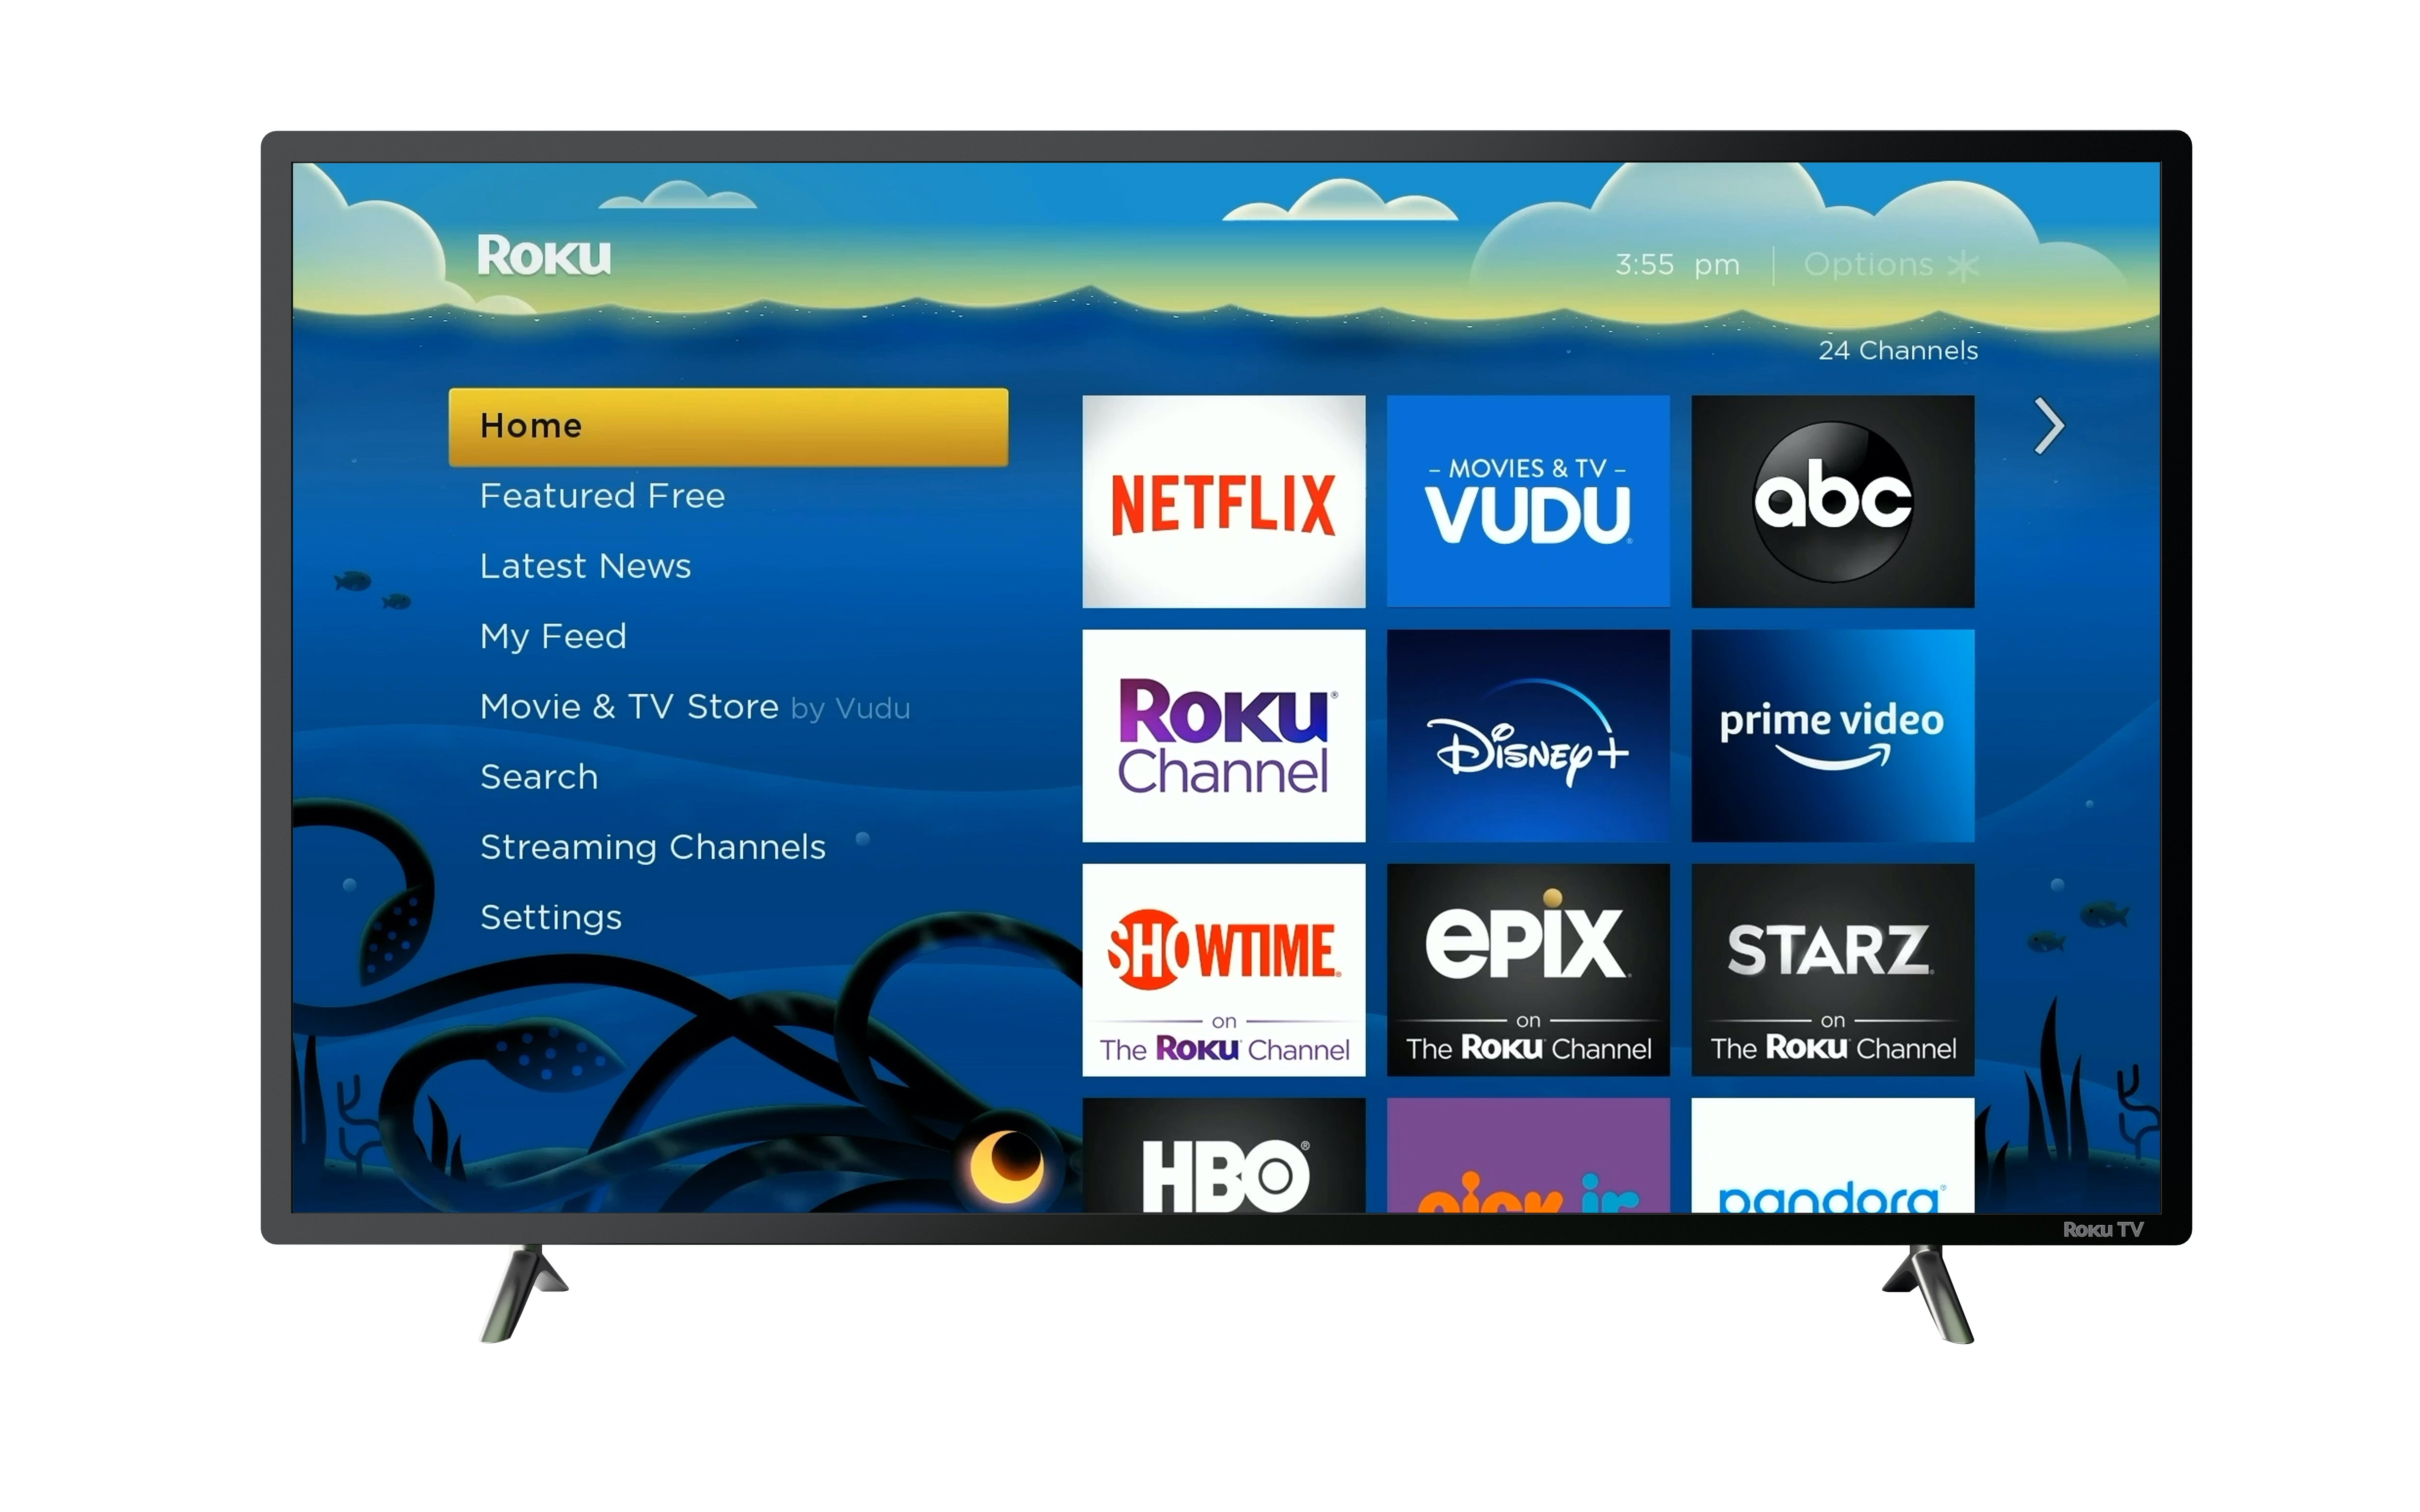 Roku Analyst: Streaming Stock Executing Well, With Attractive Valuation